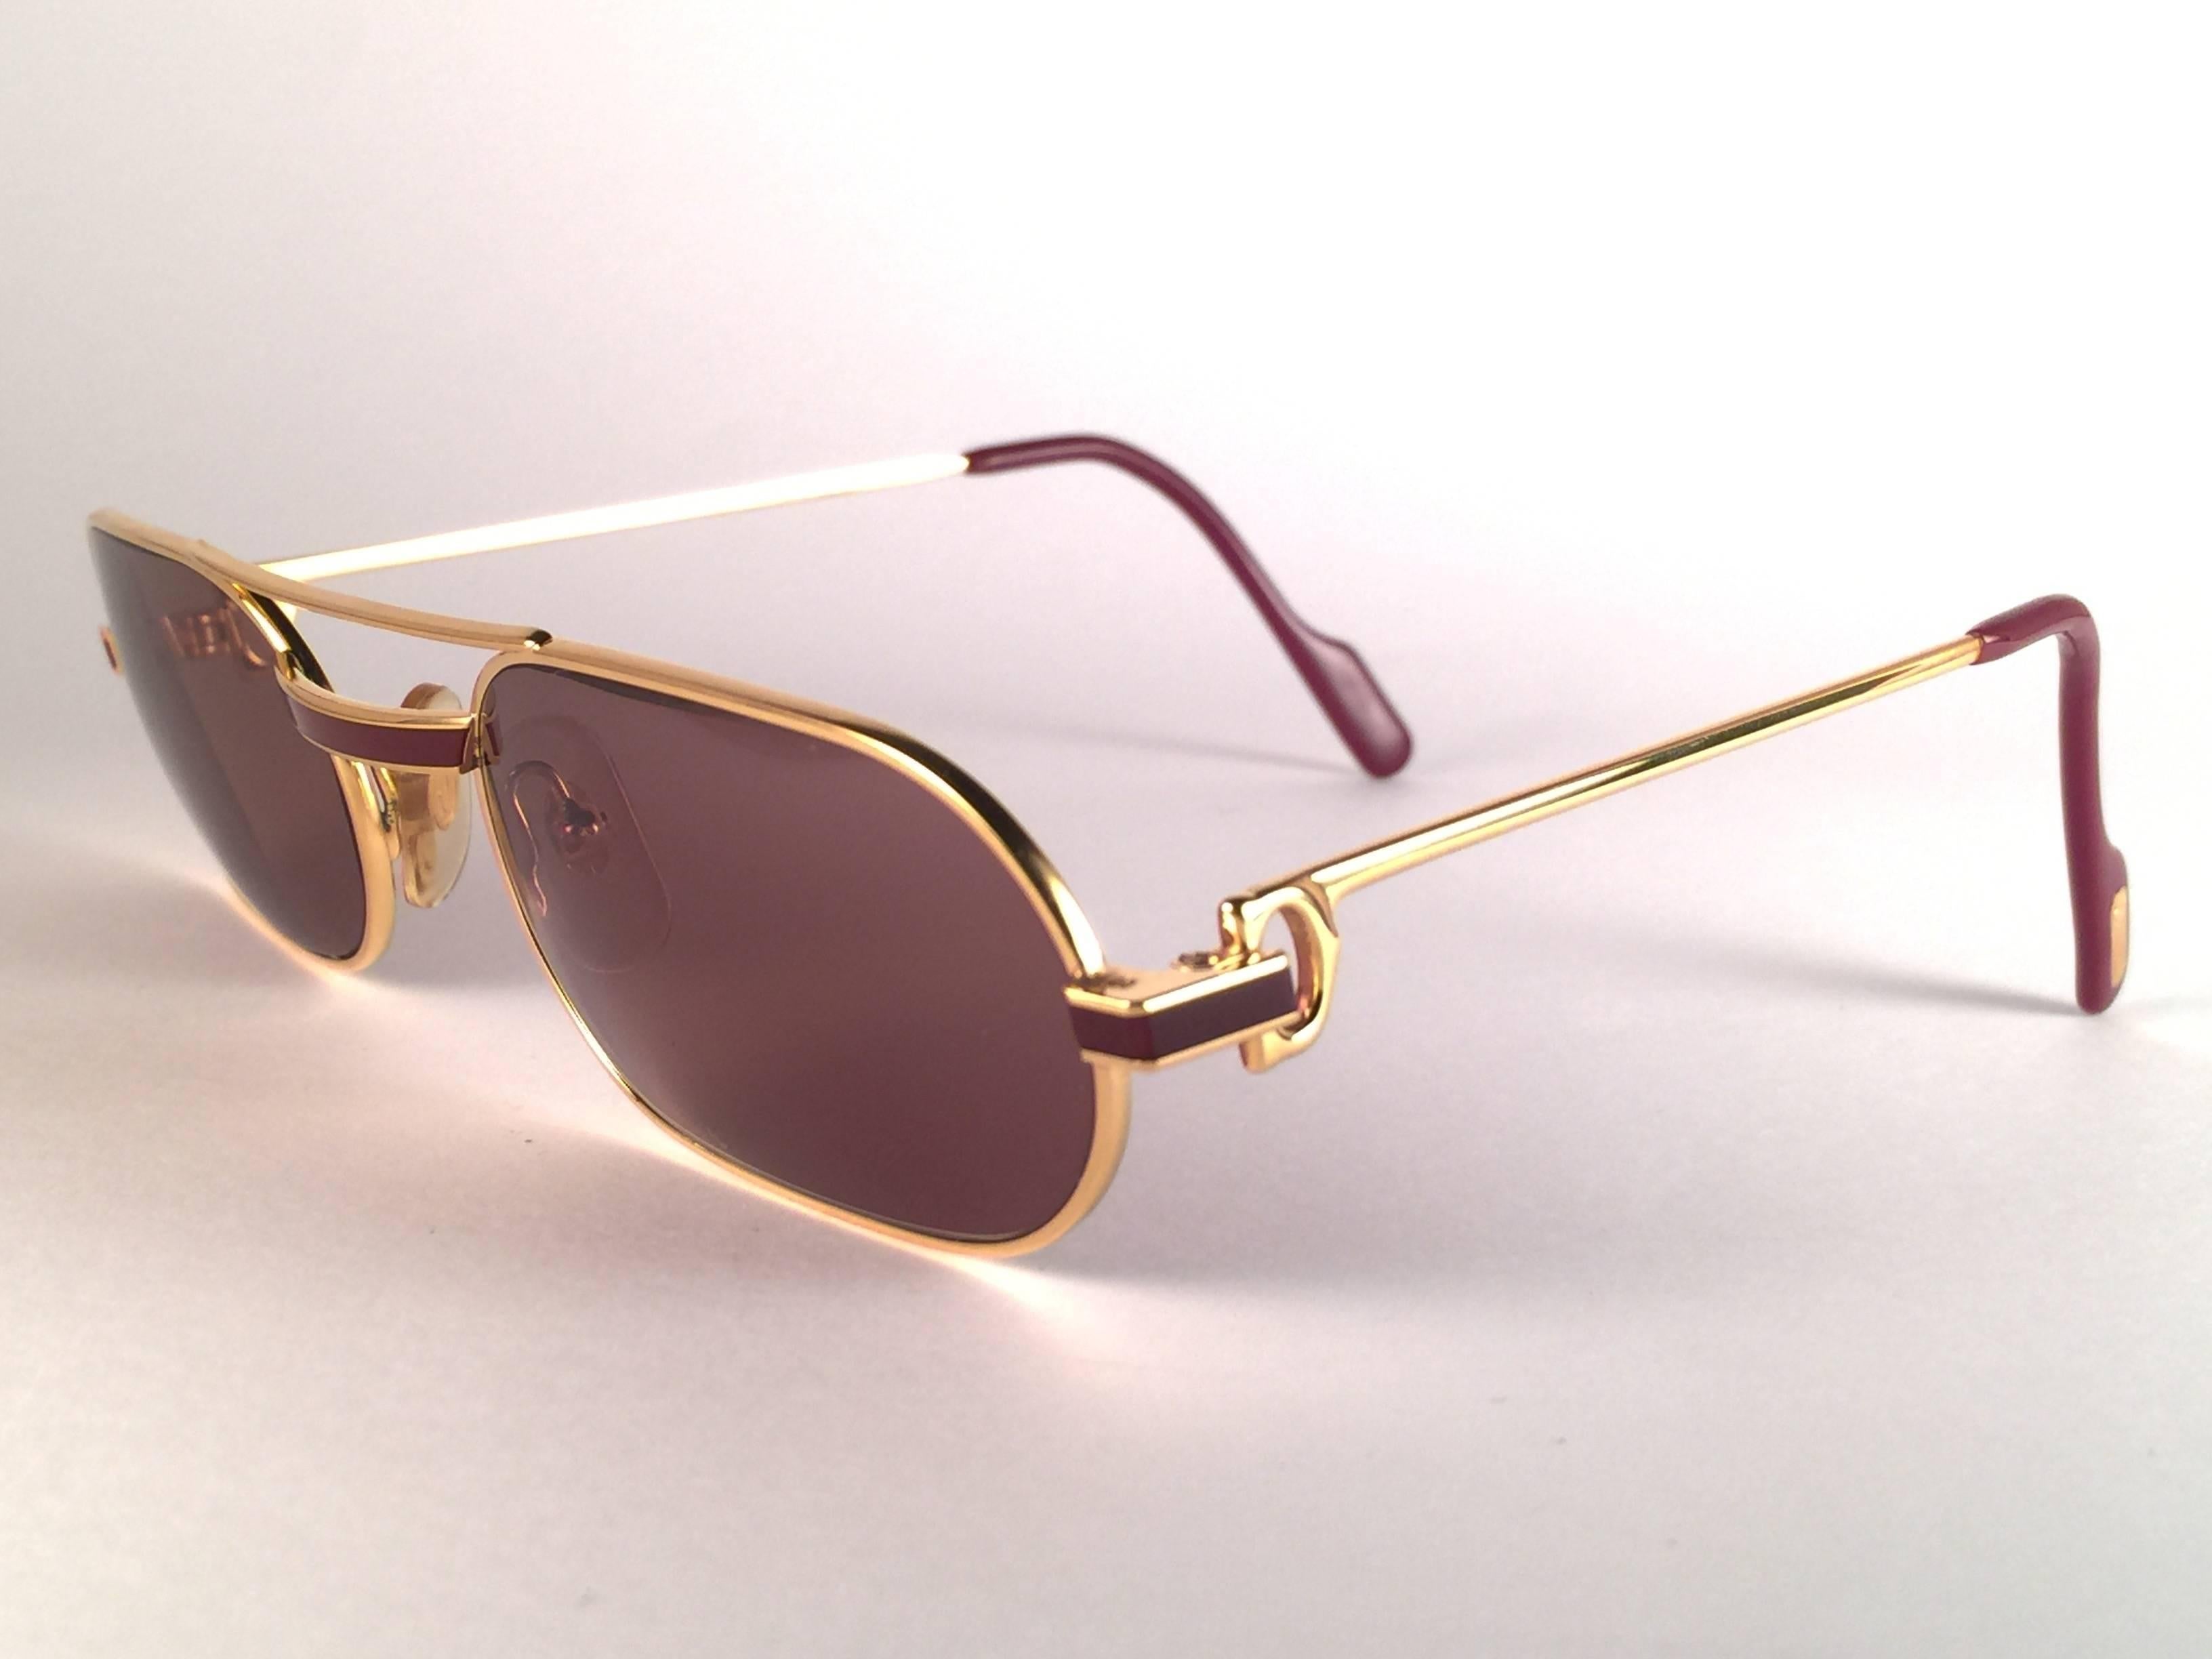 Vintage Cartier Louis Laque De Chine Medium 55mm France Sunglasses In New Condition For Sale In Baleares, Baleares